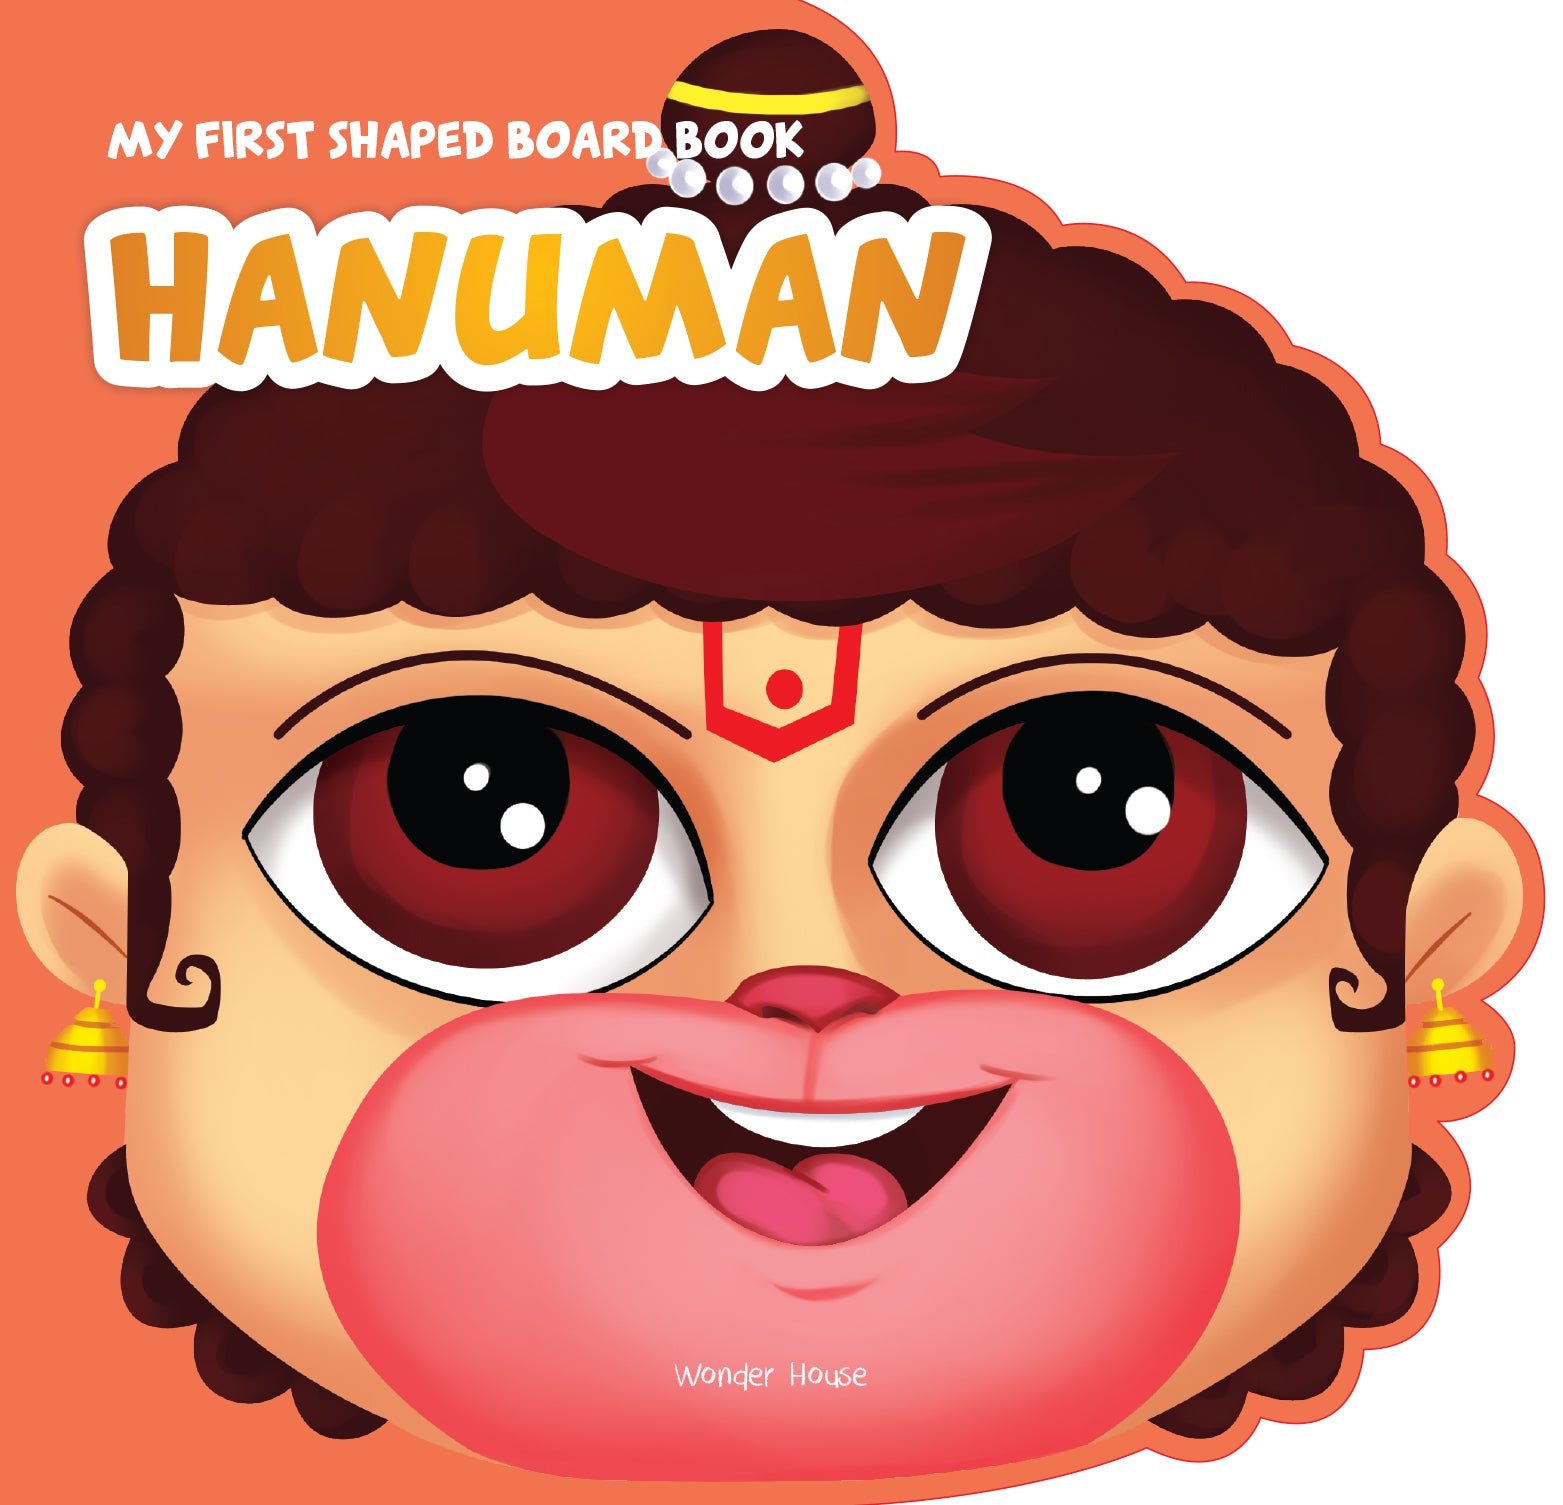 My First Shaped Board Book: Illustrated Lord Hanuman Hindu Mythology Picture Book for Kids Age 2+ (Indian Gods and Goddesses)